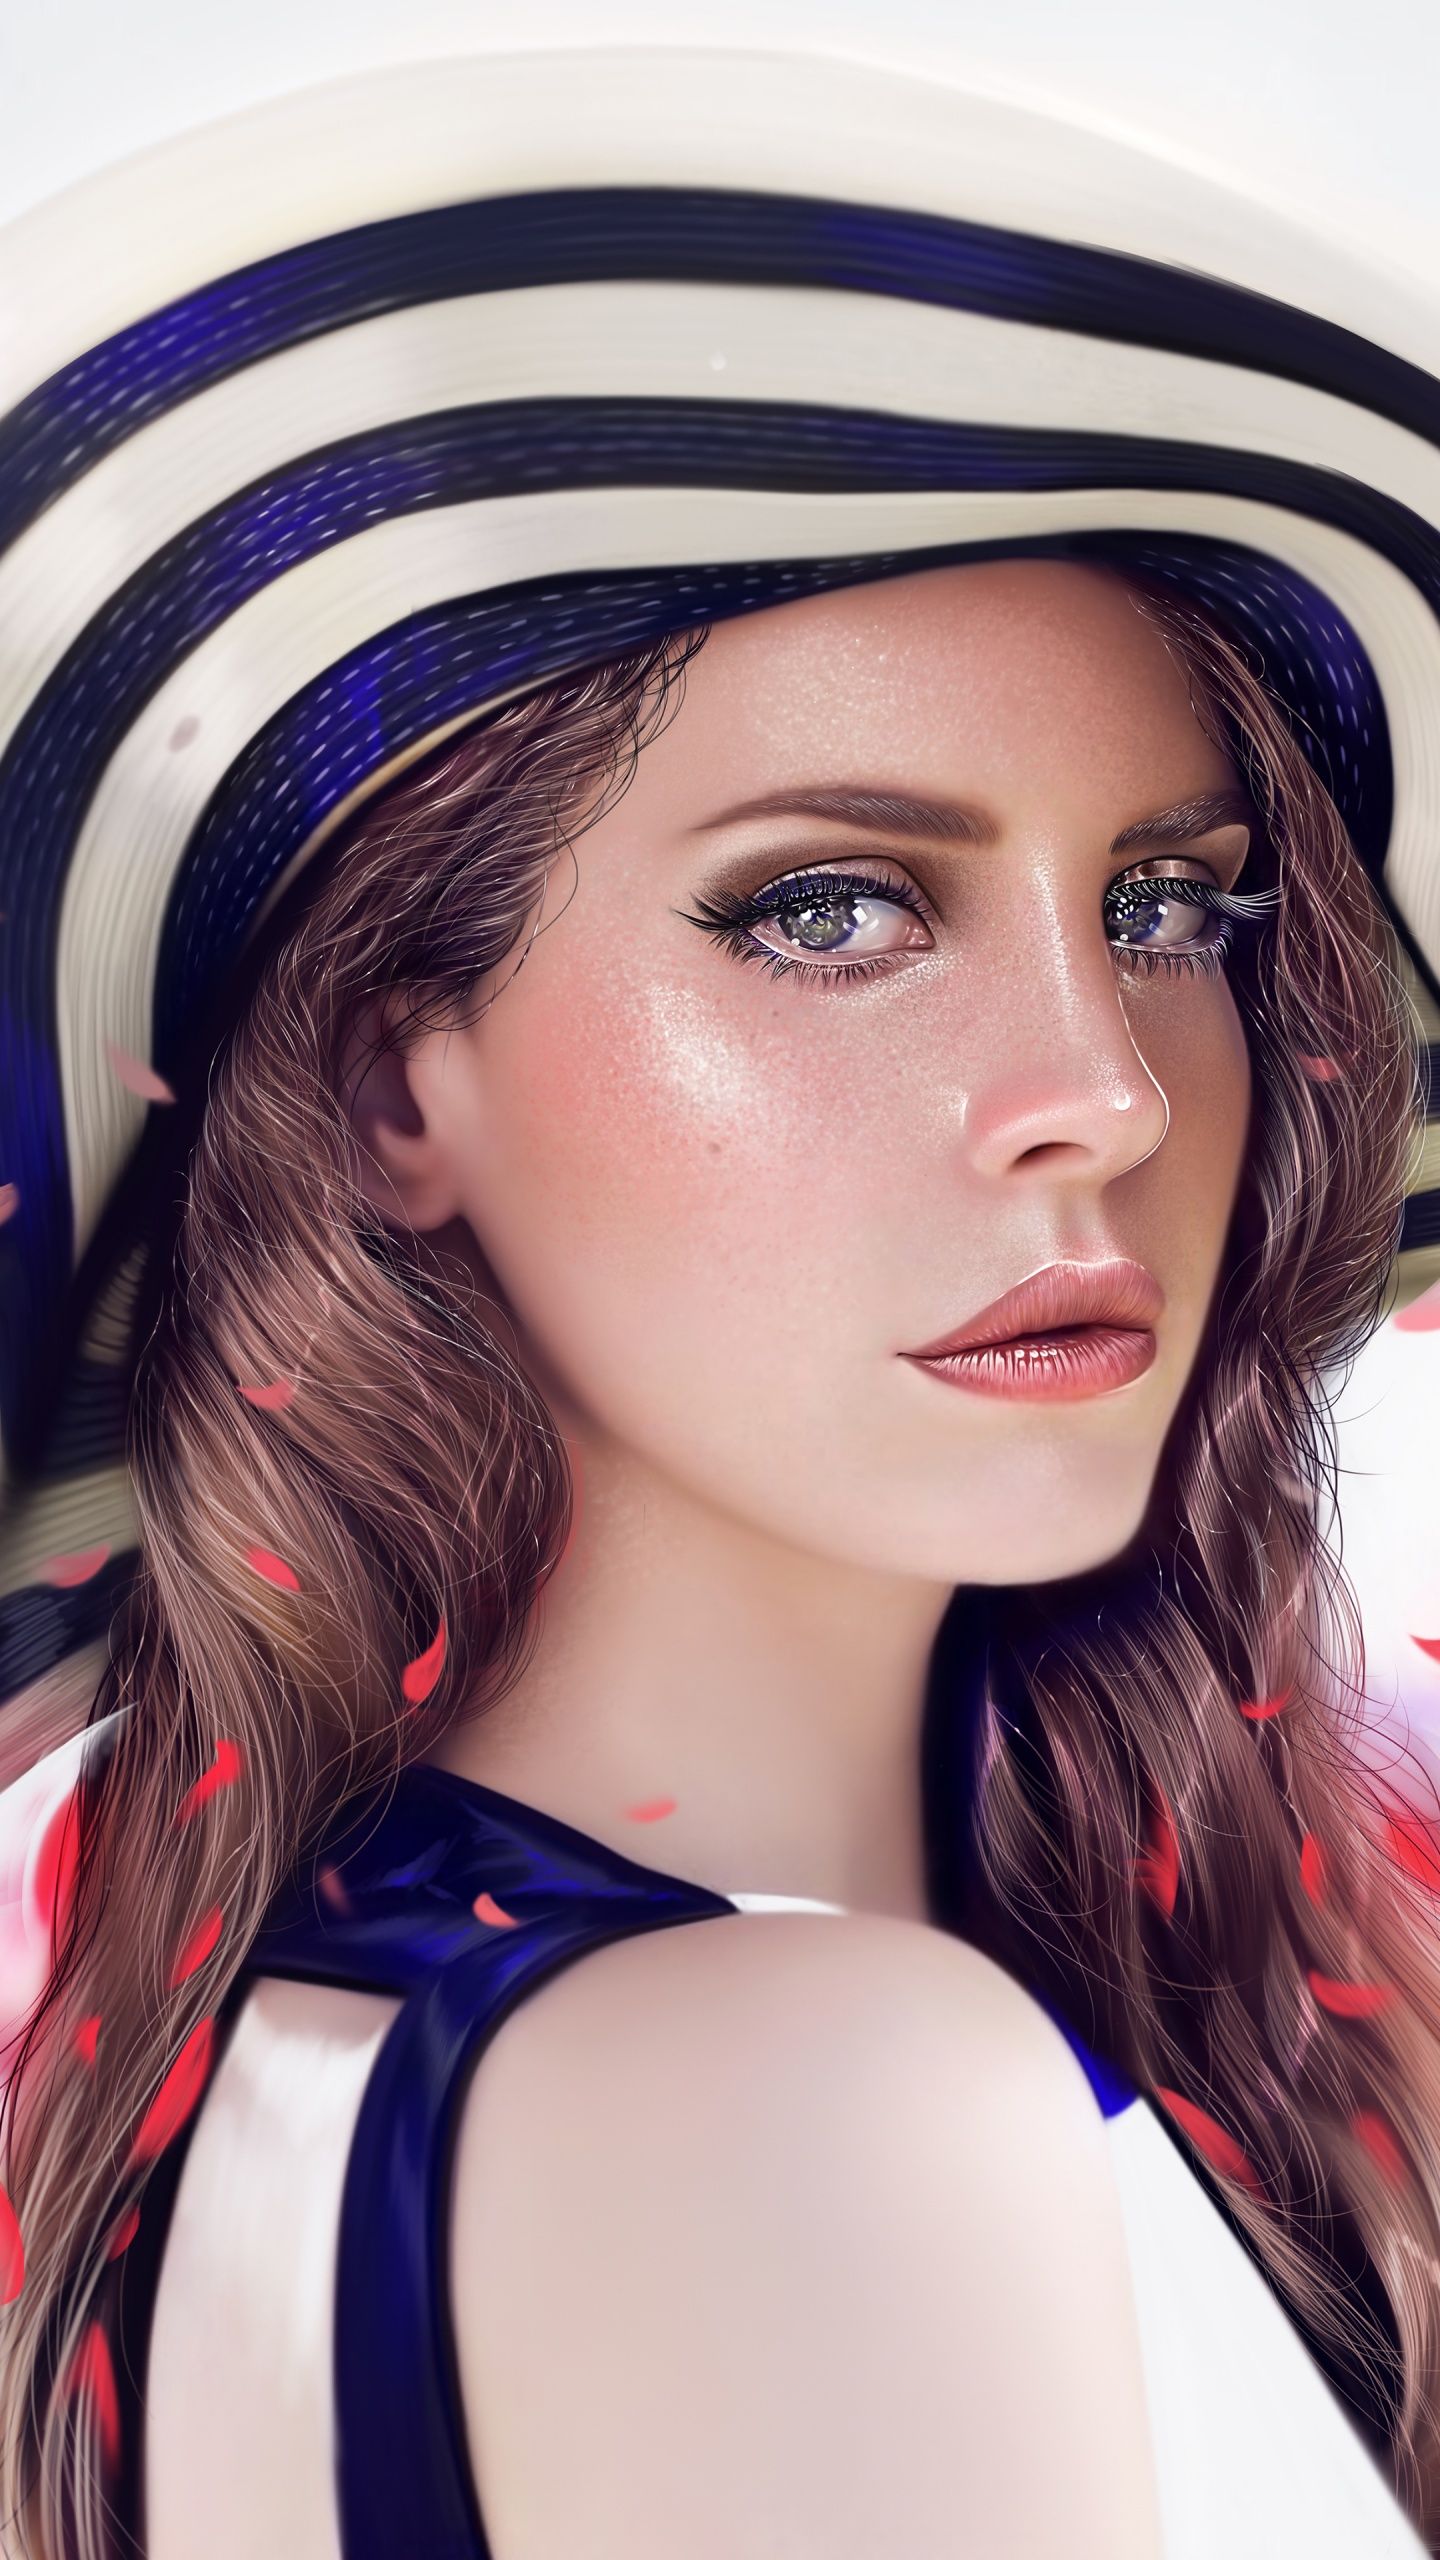 A beautiful girl with a hat and blue eyes. - Lana Del Rey